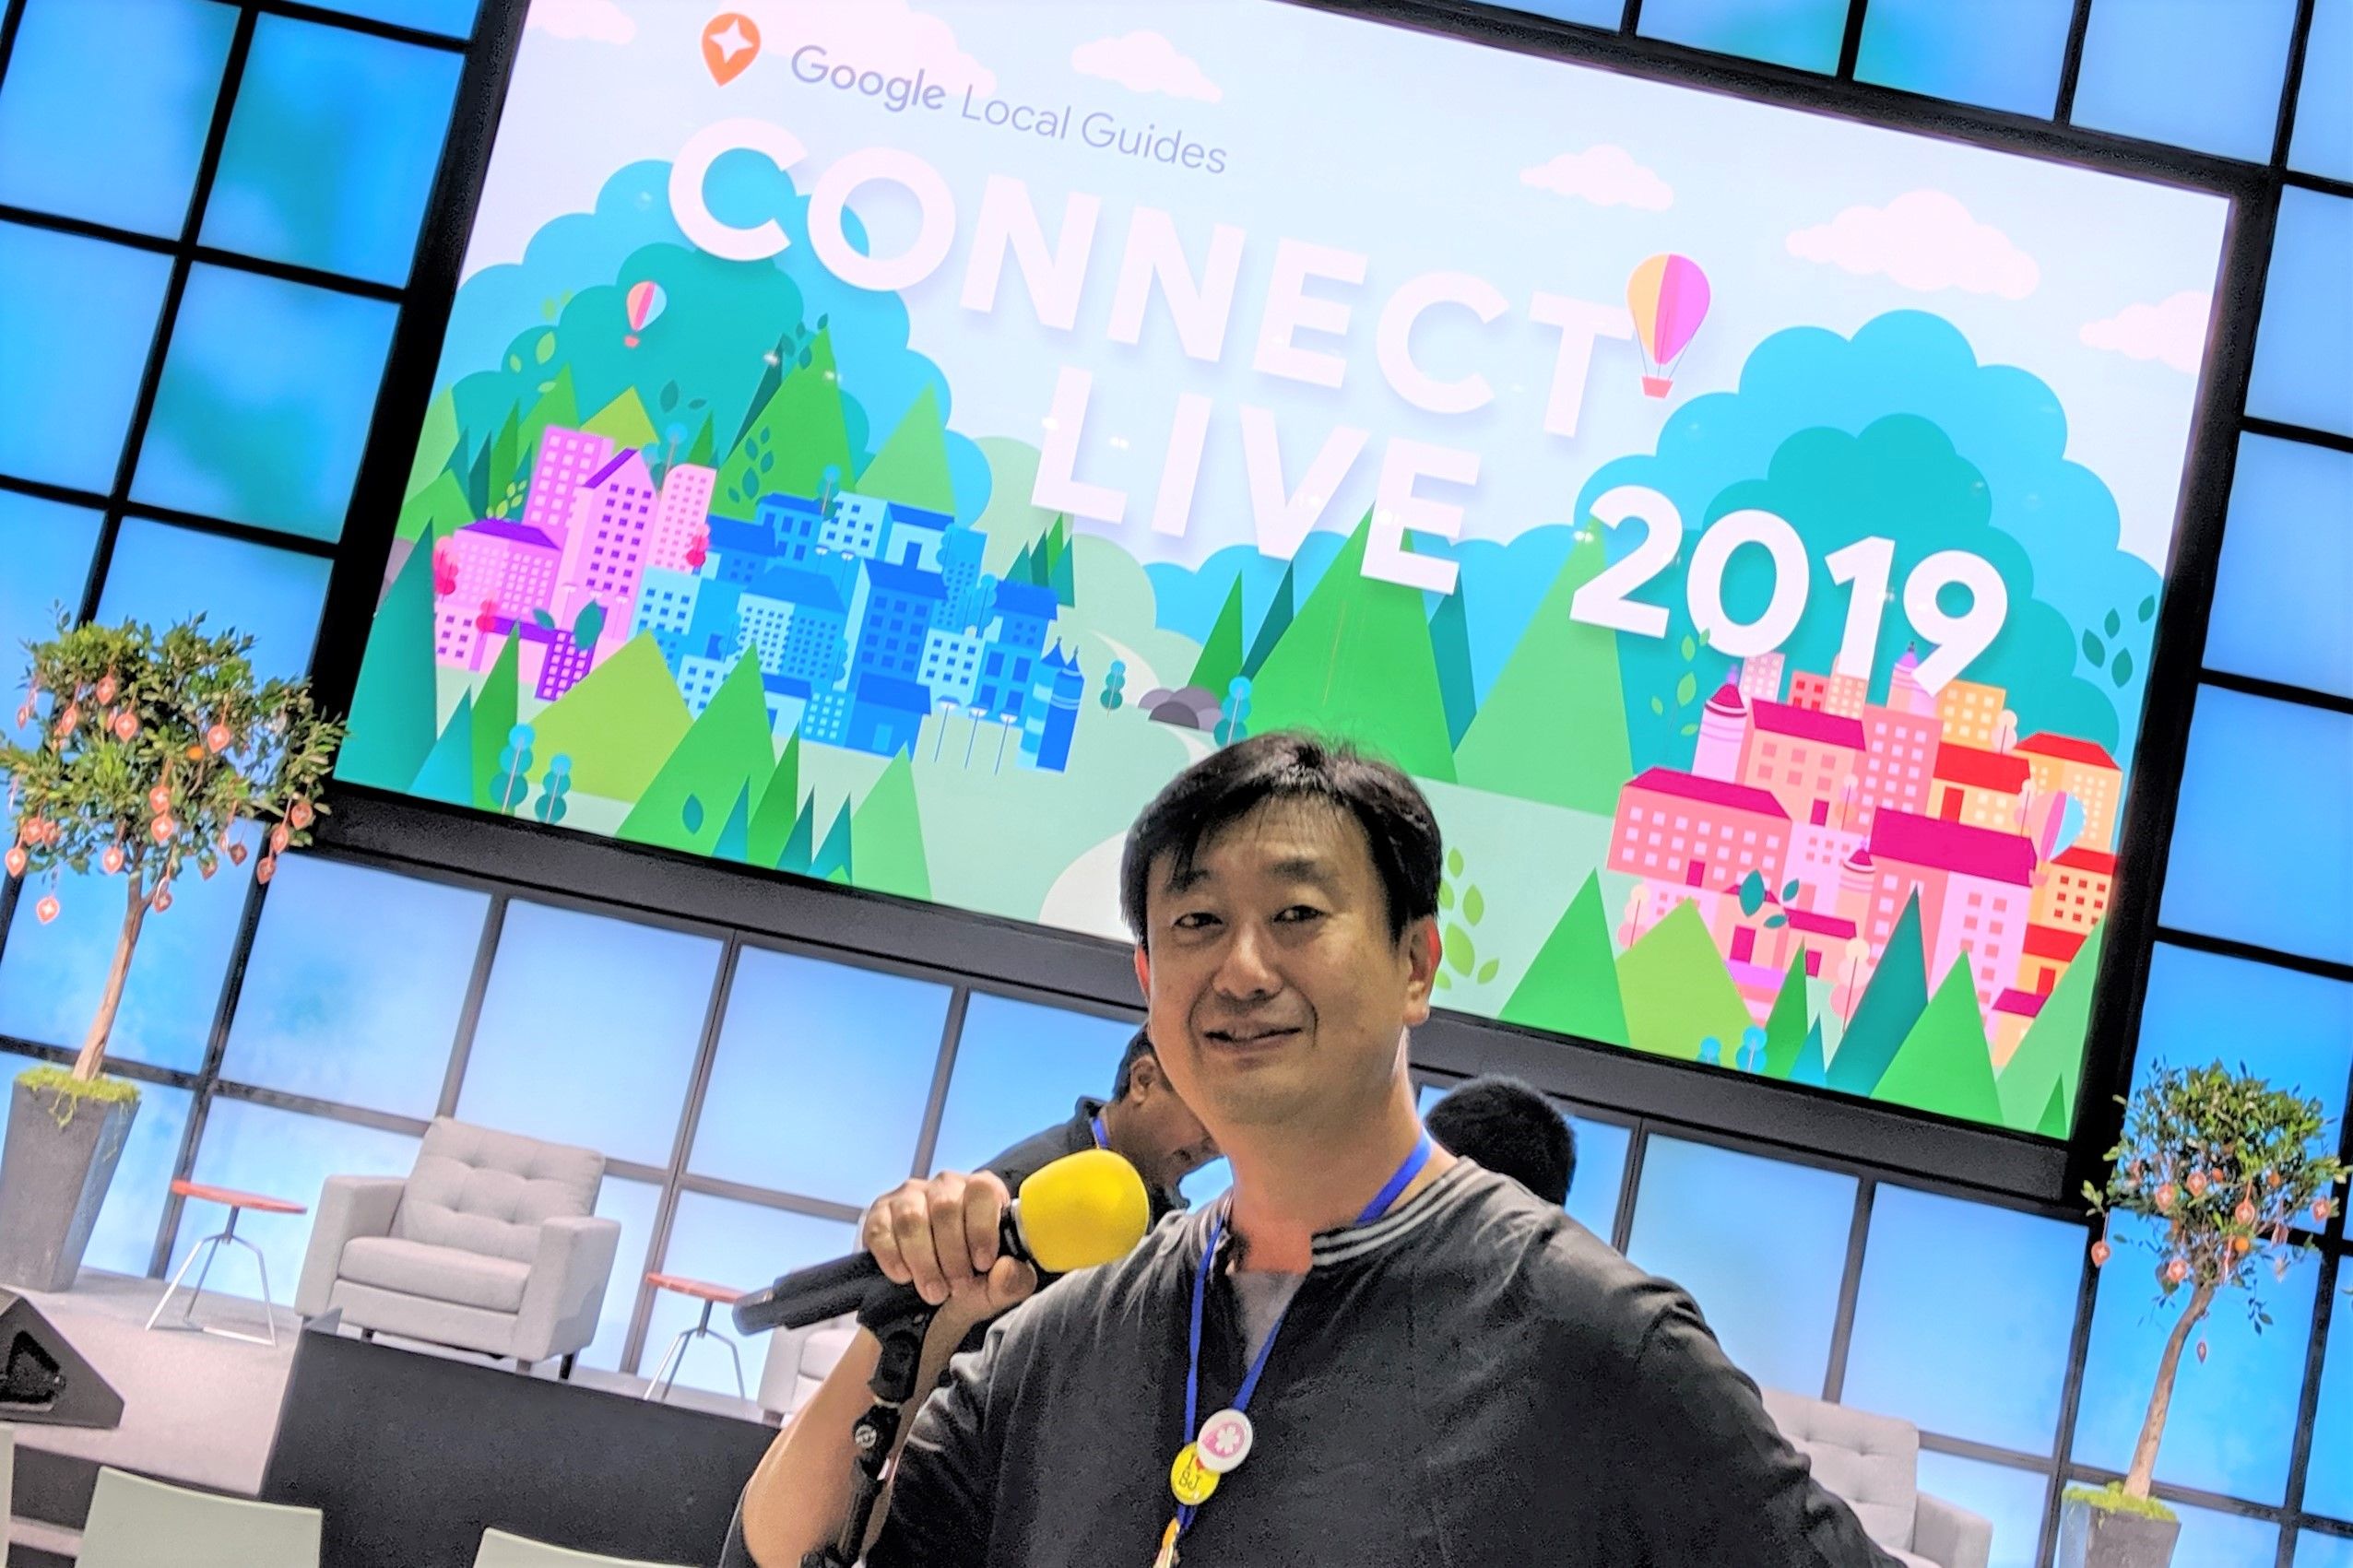 Connect Live 2019 for San Jose.